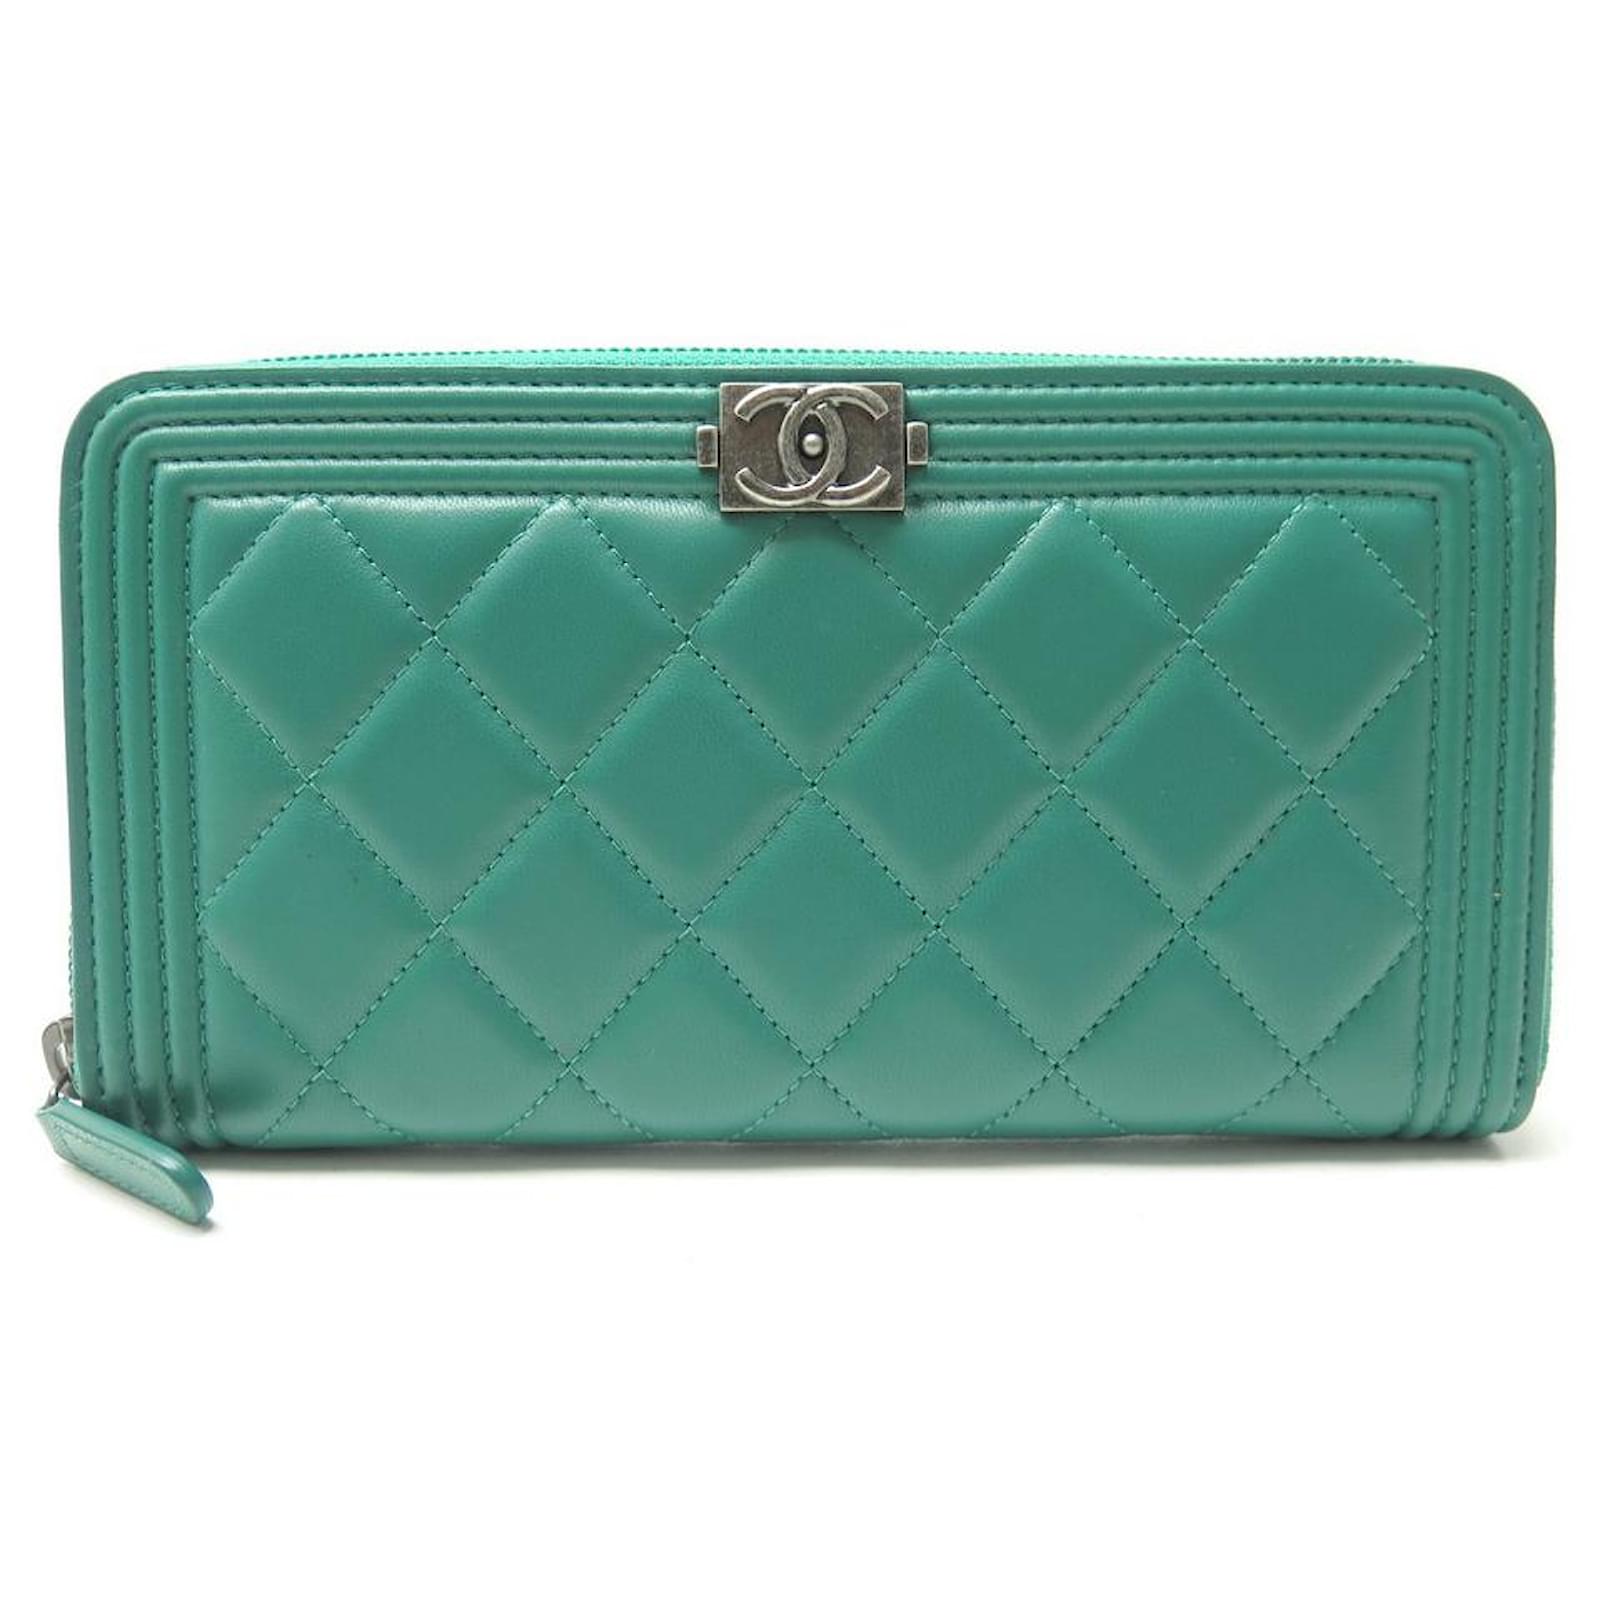 NEW CHANEL BOY ZIPPED WALLET A80815 GREEN QUILTED LEATHER WALLET